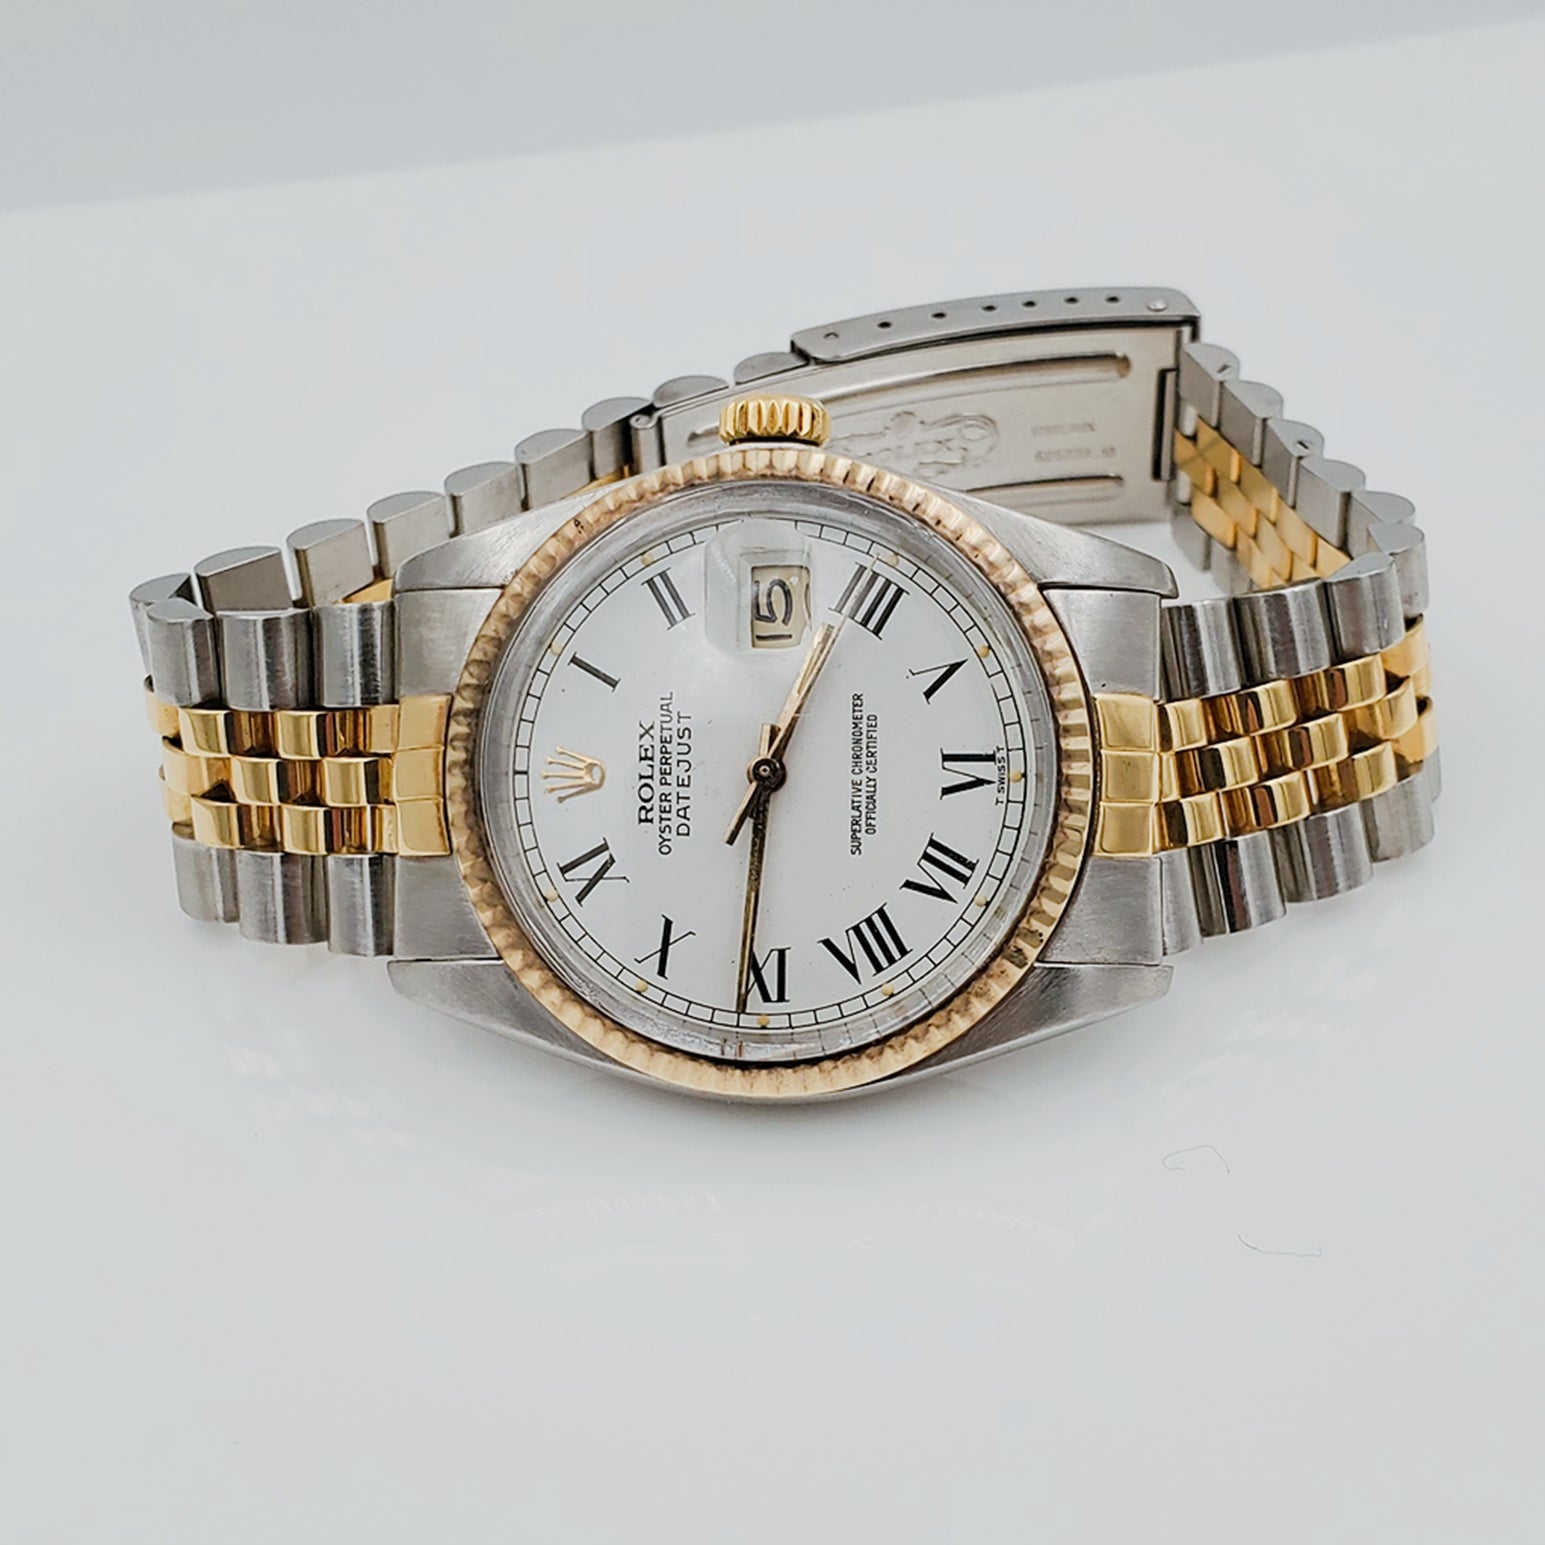 Men's Rolex 36mm Vintage DateJust 18k Gold / Stainless Steel Two Tone Watch with White Dial, Roman Numeral and Fluted Bezel. (Pre-Owned)